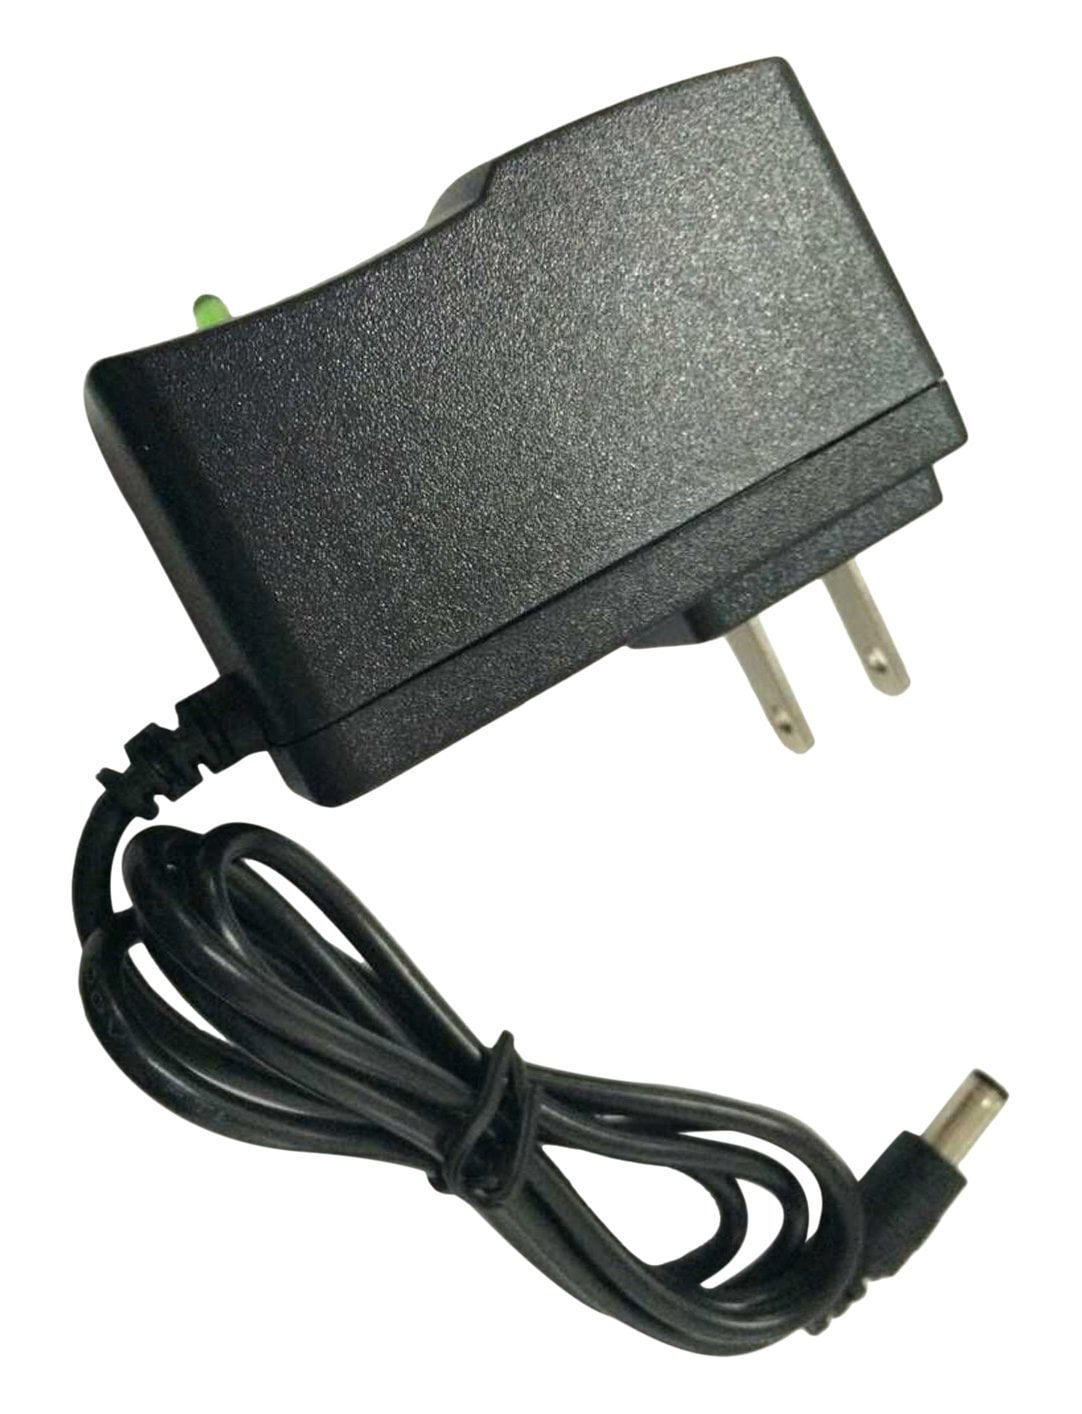 Omnihil 6V 2A 2000mA AC DC Adapter Regulated Power Supply Extra 8 Feet Cord 3.5 millimeters x 1.35 millimeters Plug Size